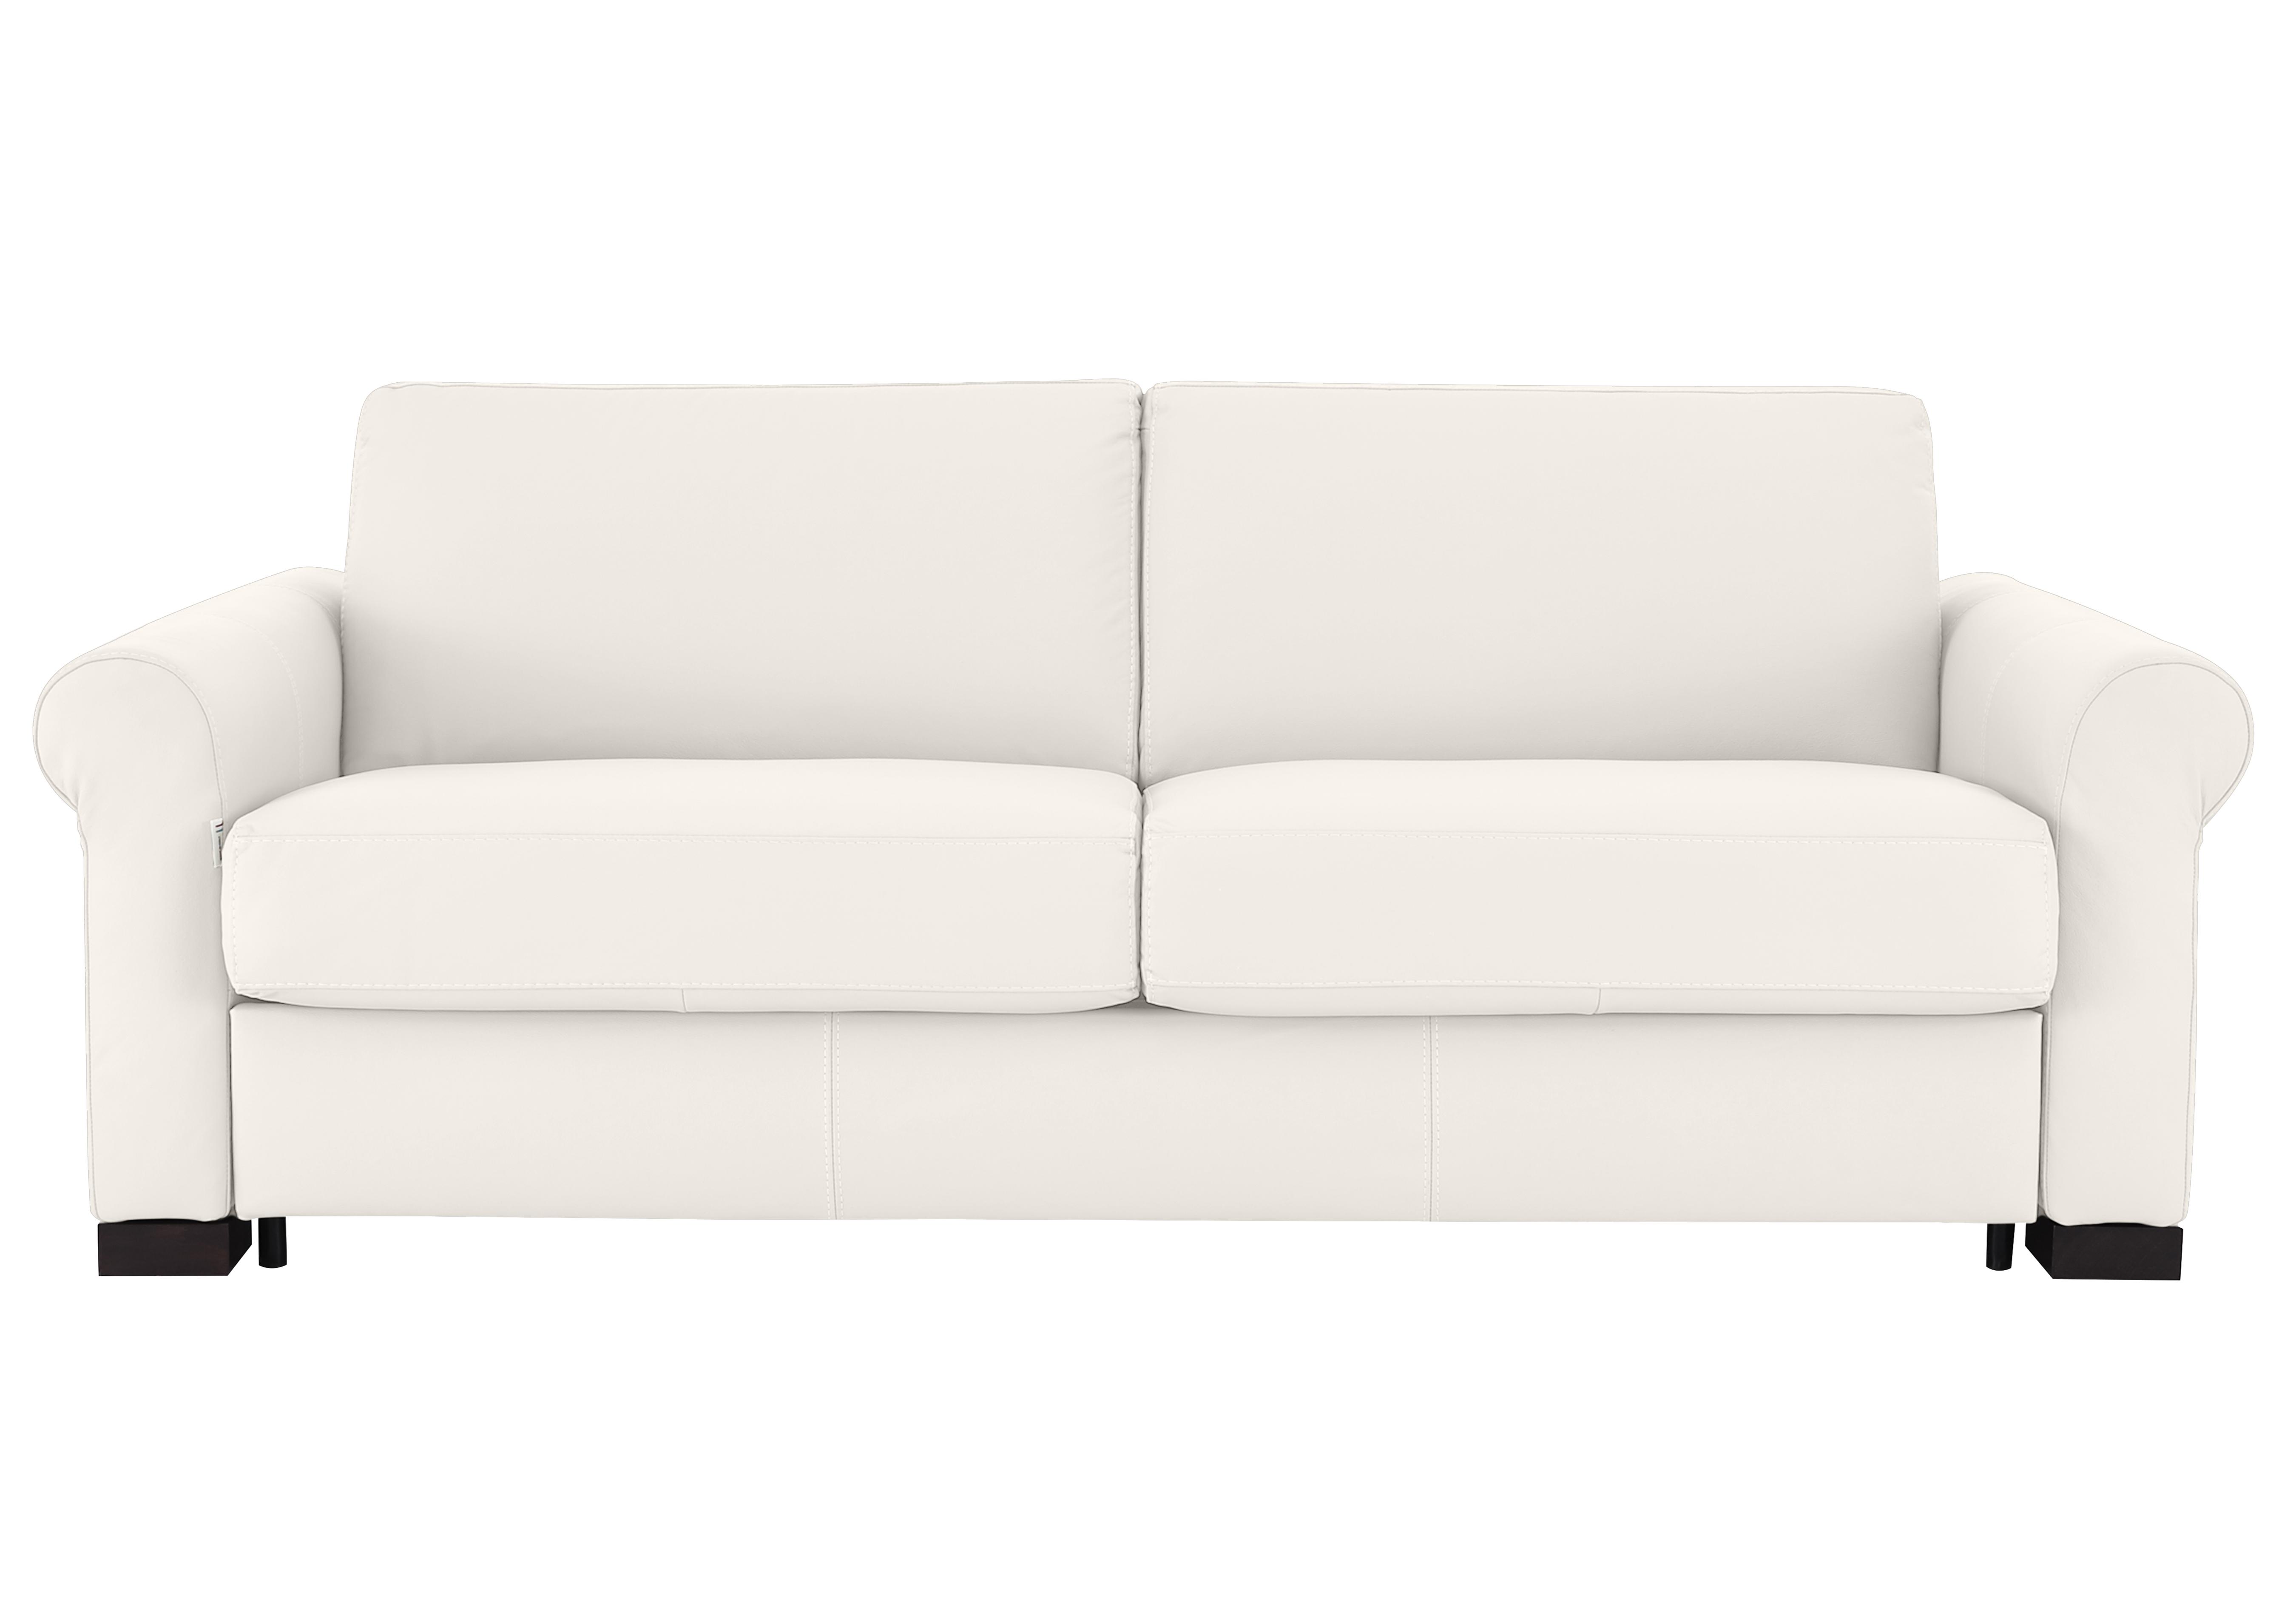 Alcova 3 Seater Leather Sofa Bed with Scroll Arms in Torello Bianco 93 on Furniture Village